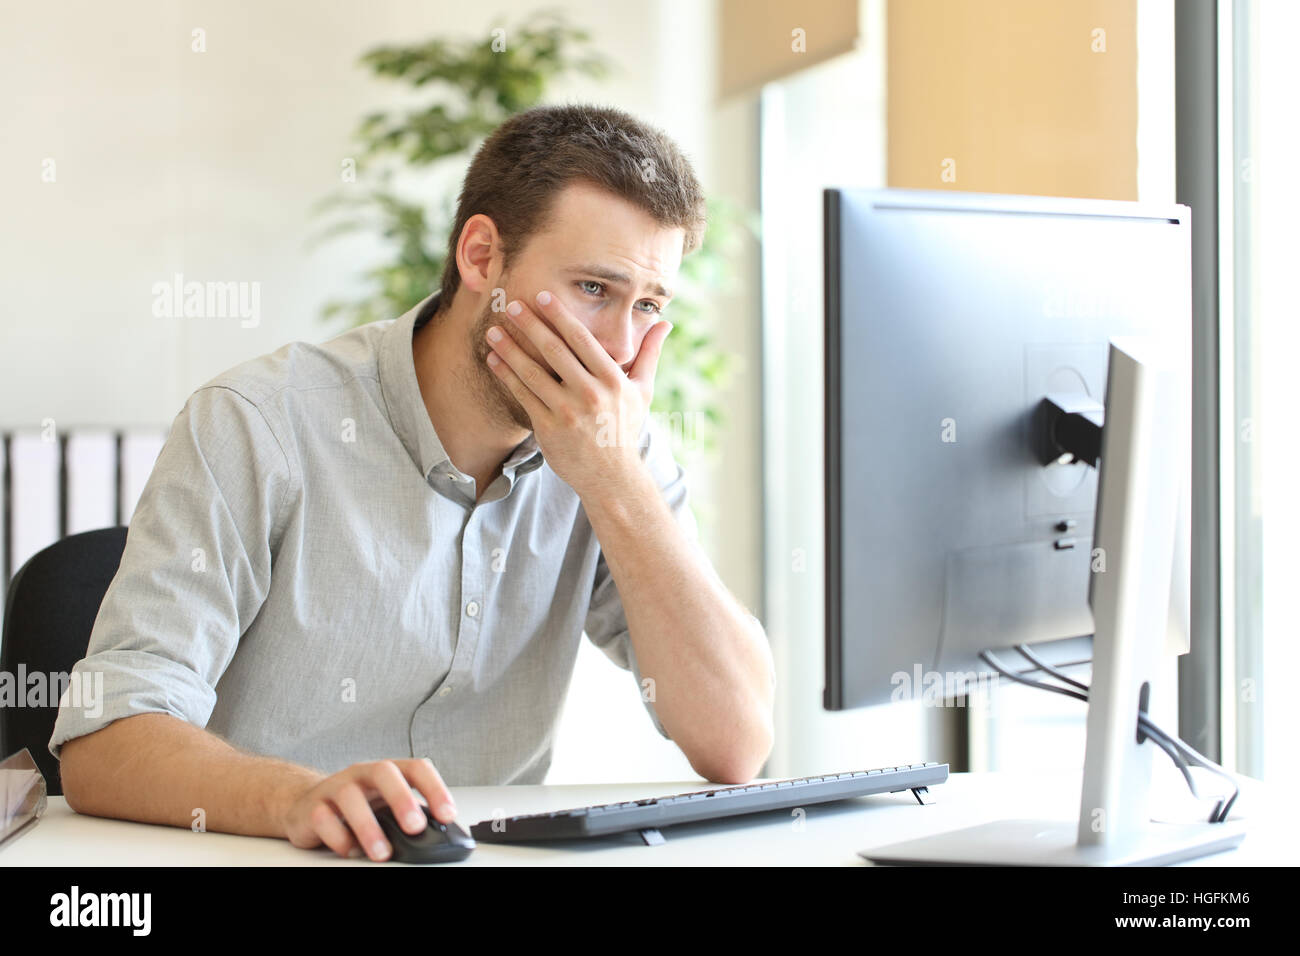 Worried businessman working trying to solve troubles on line with a desktop computer at office Stock Photo